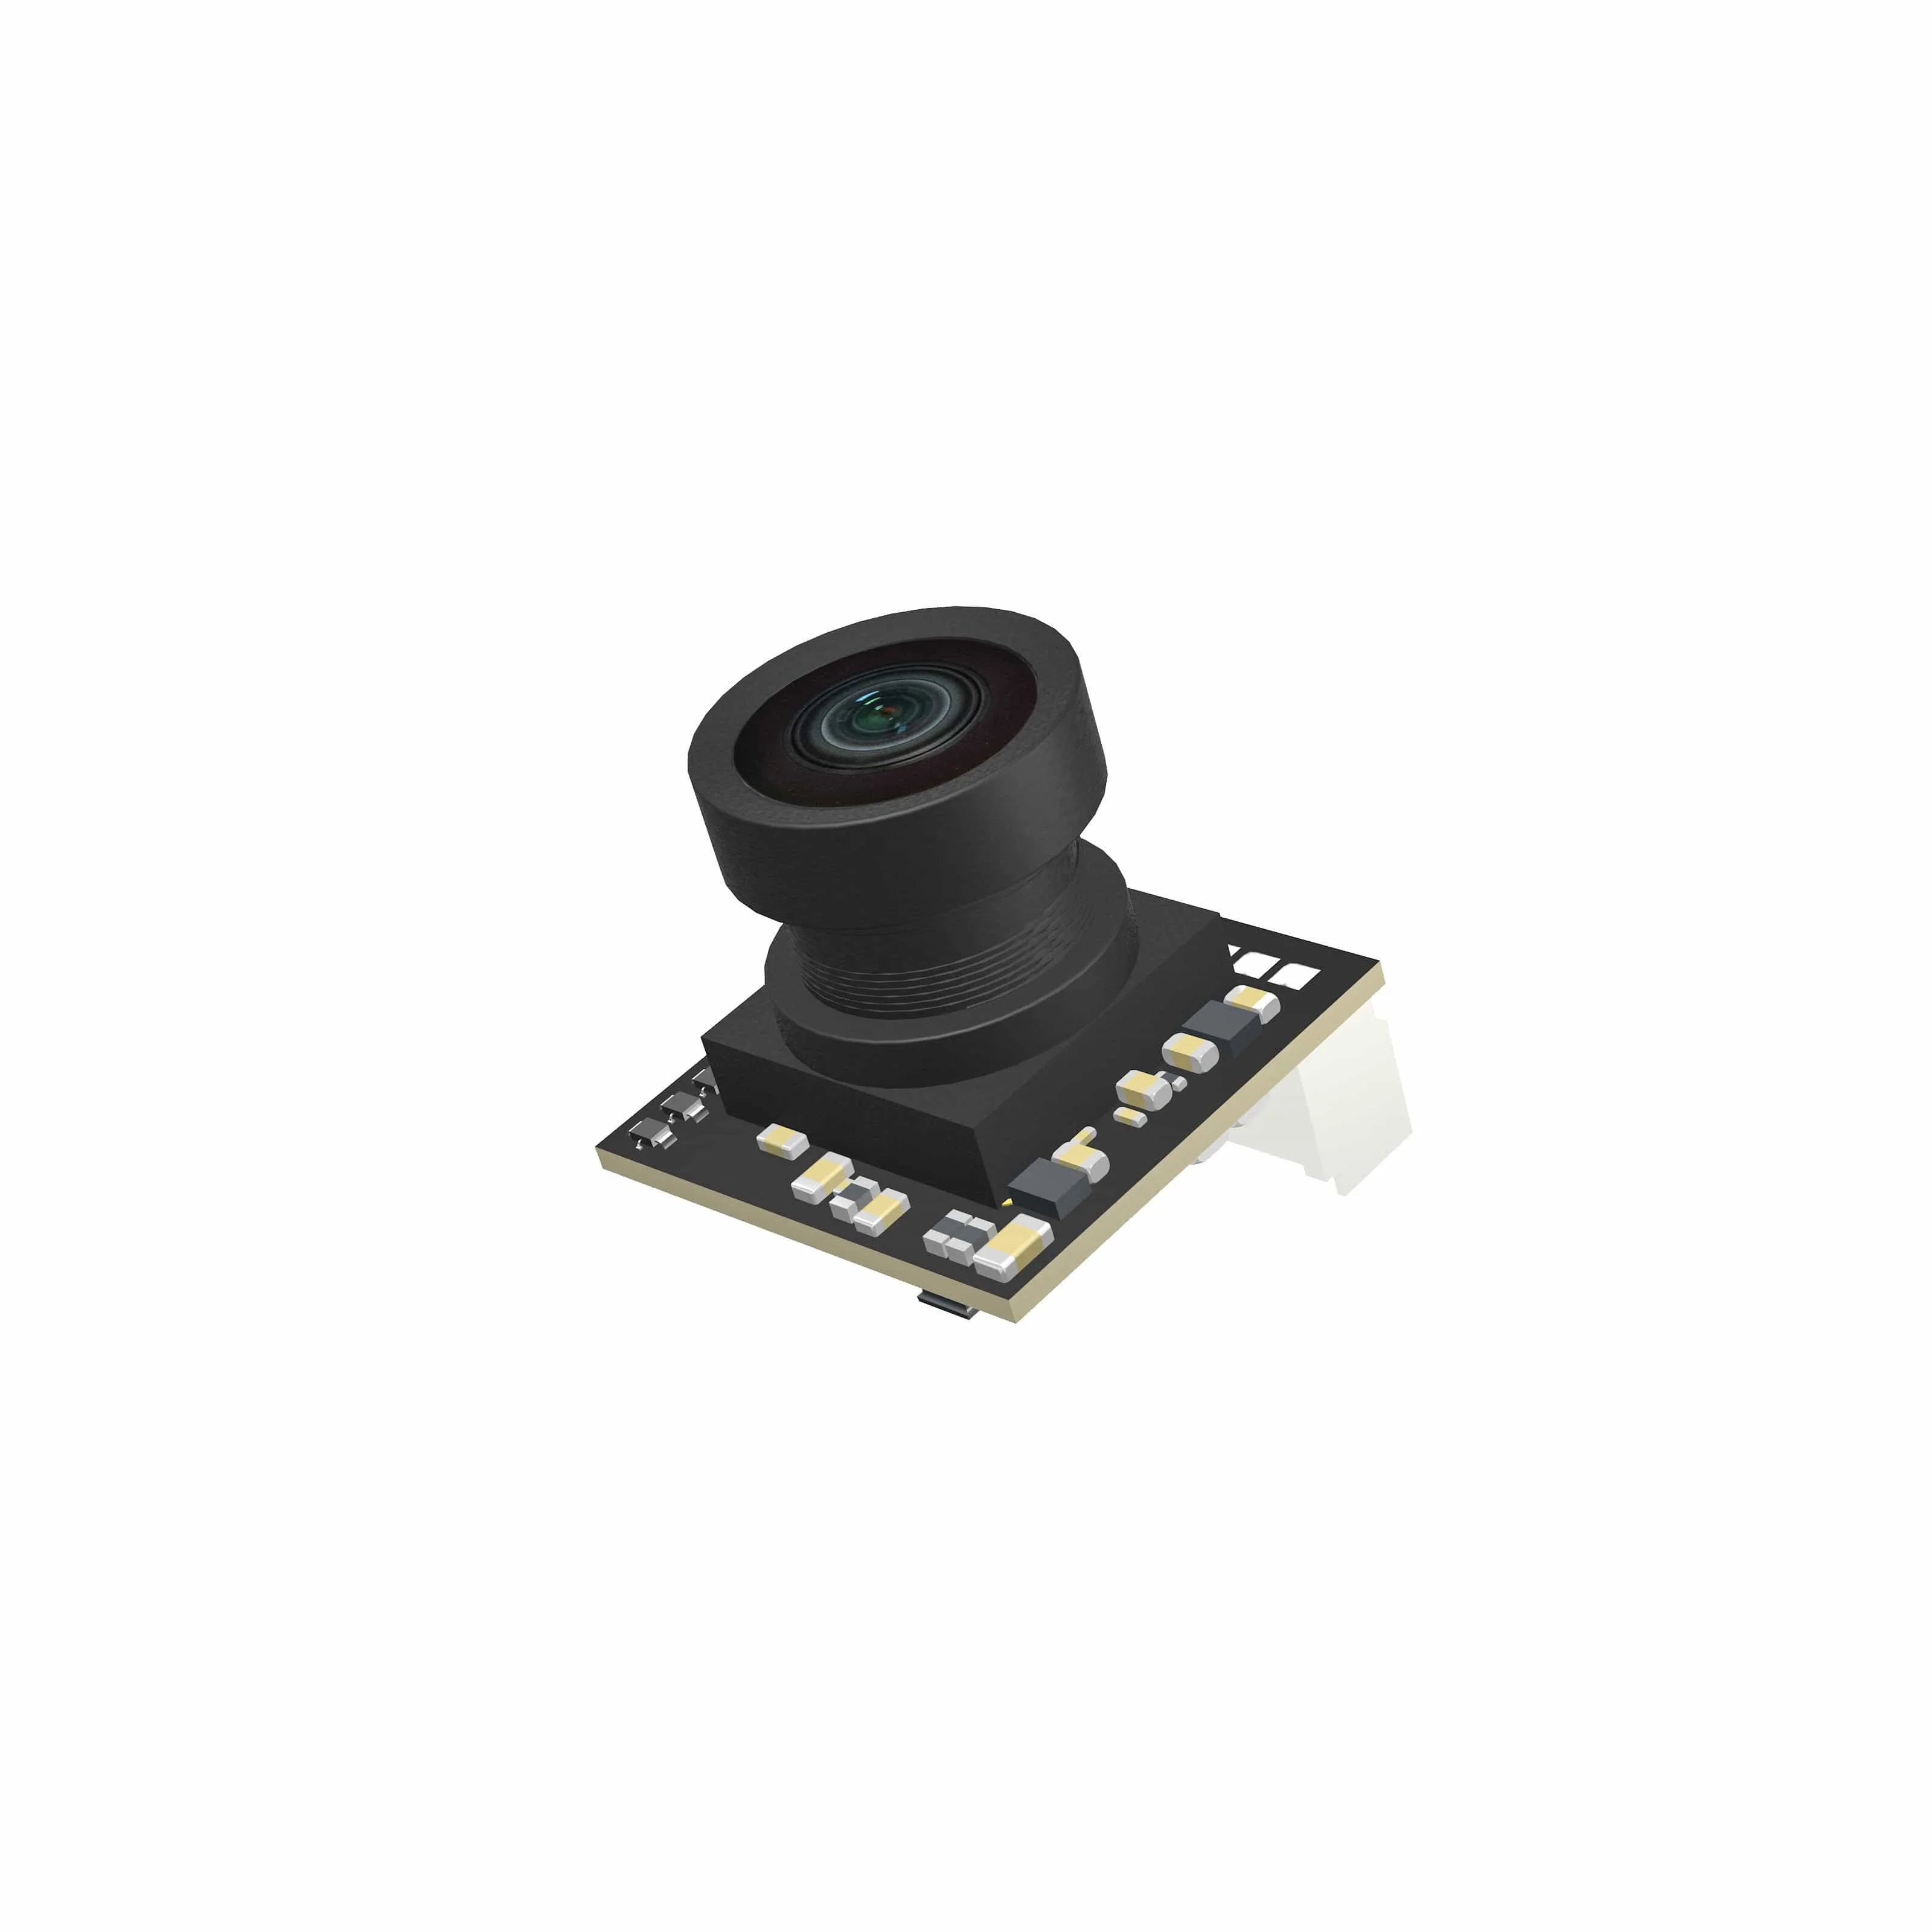 

Caddx Ant Lite 1/3'' CMOS 1.8mm 1200TVL 16:9 PAL/NTSC Global WDR FOV 165° FPV Camera FPVCycle Edition for FPV Racing RC Drone